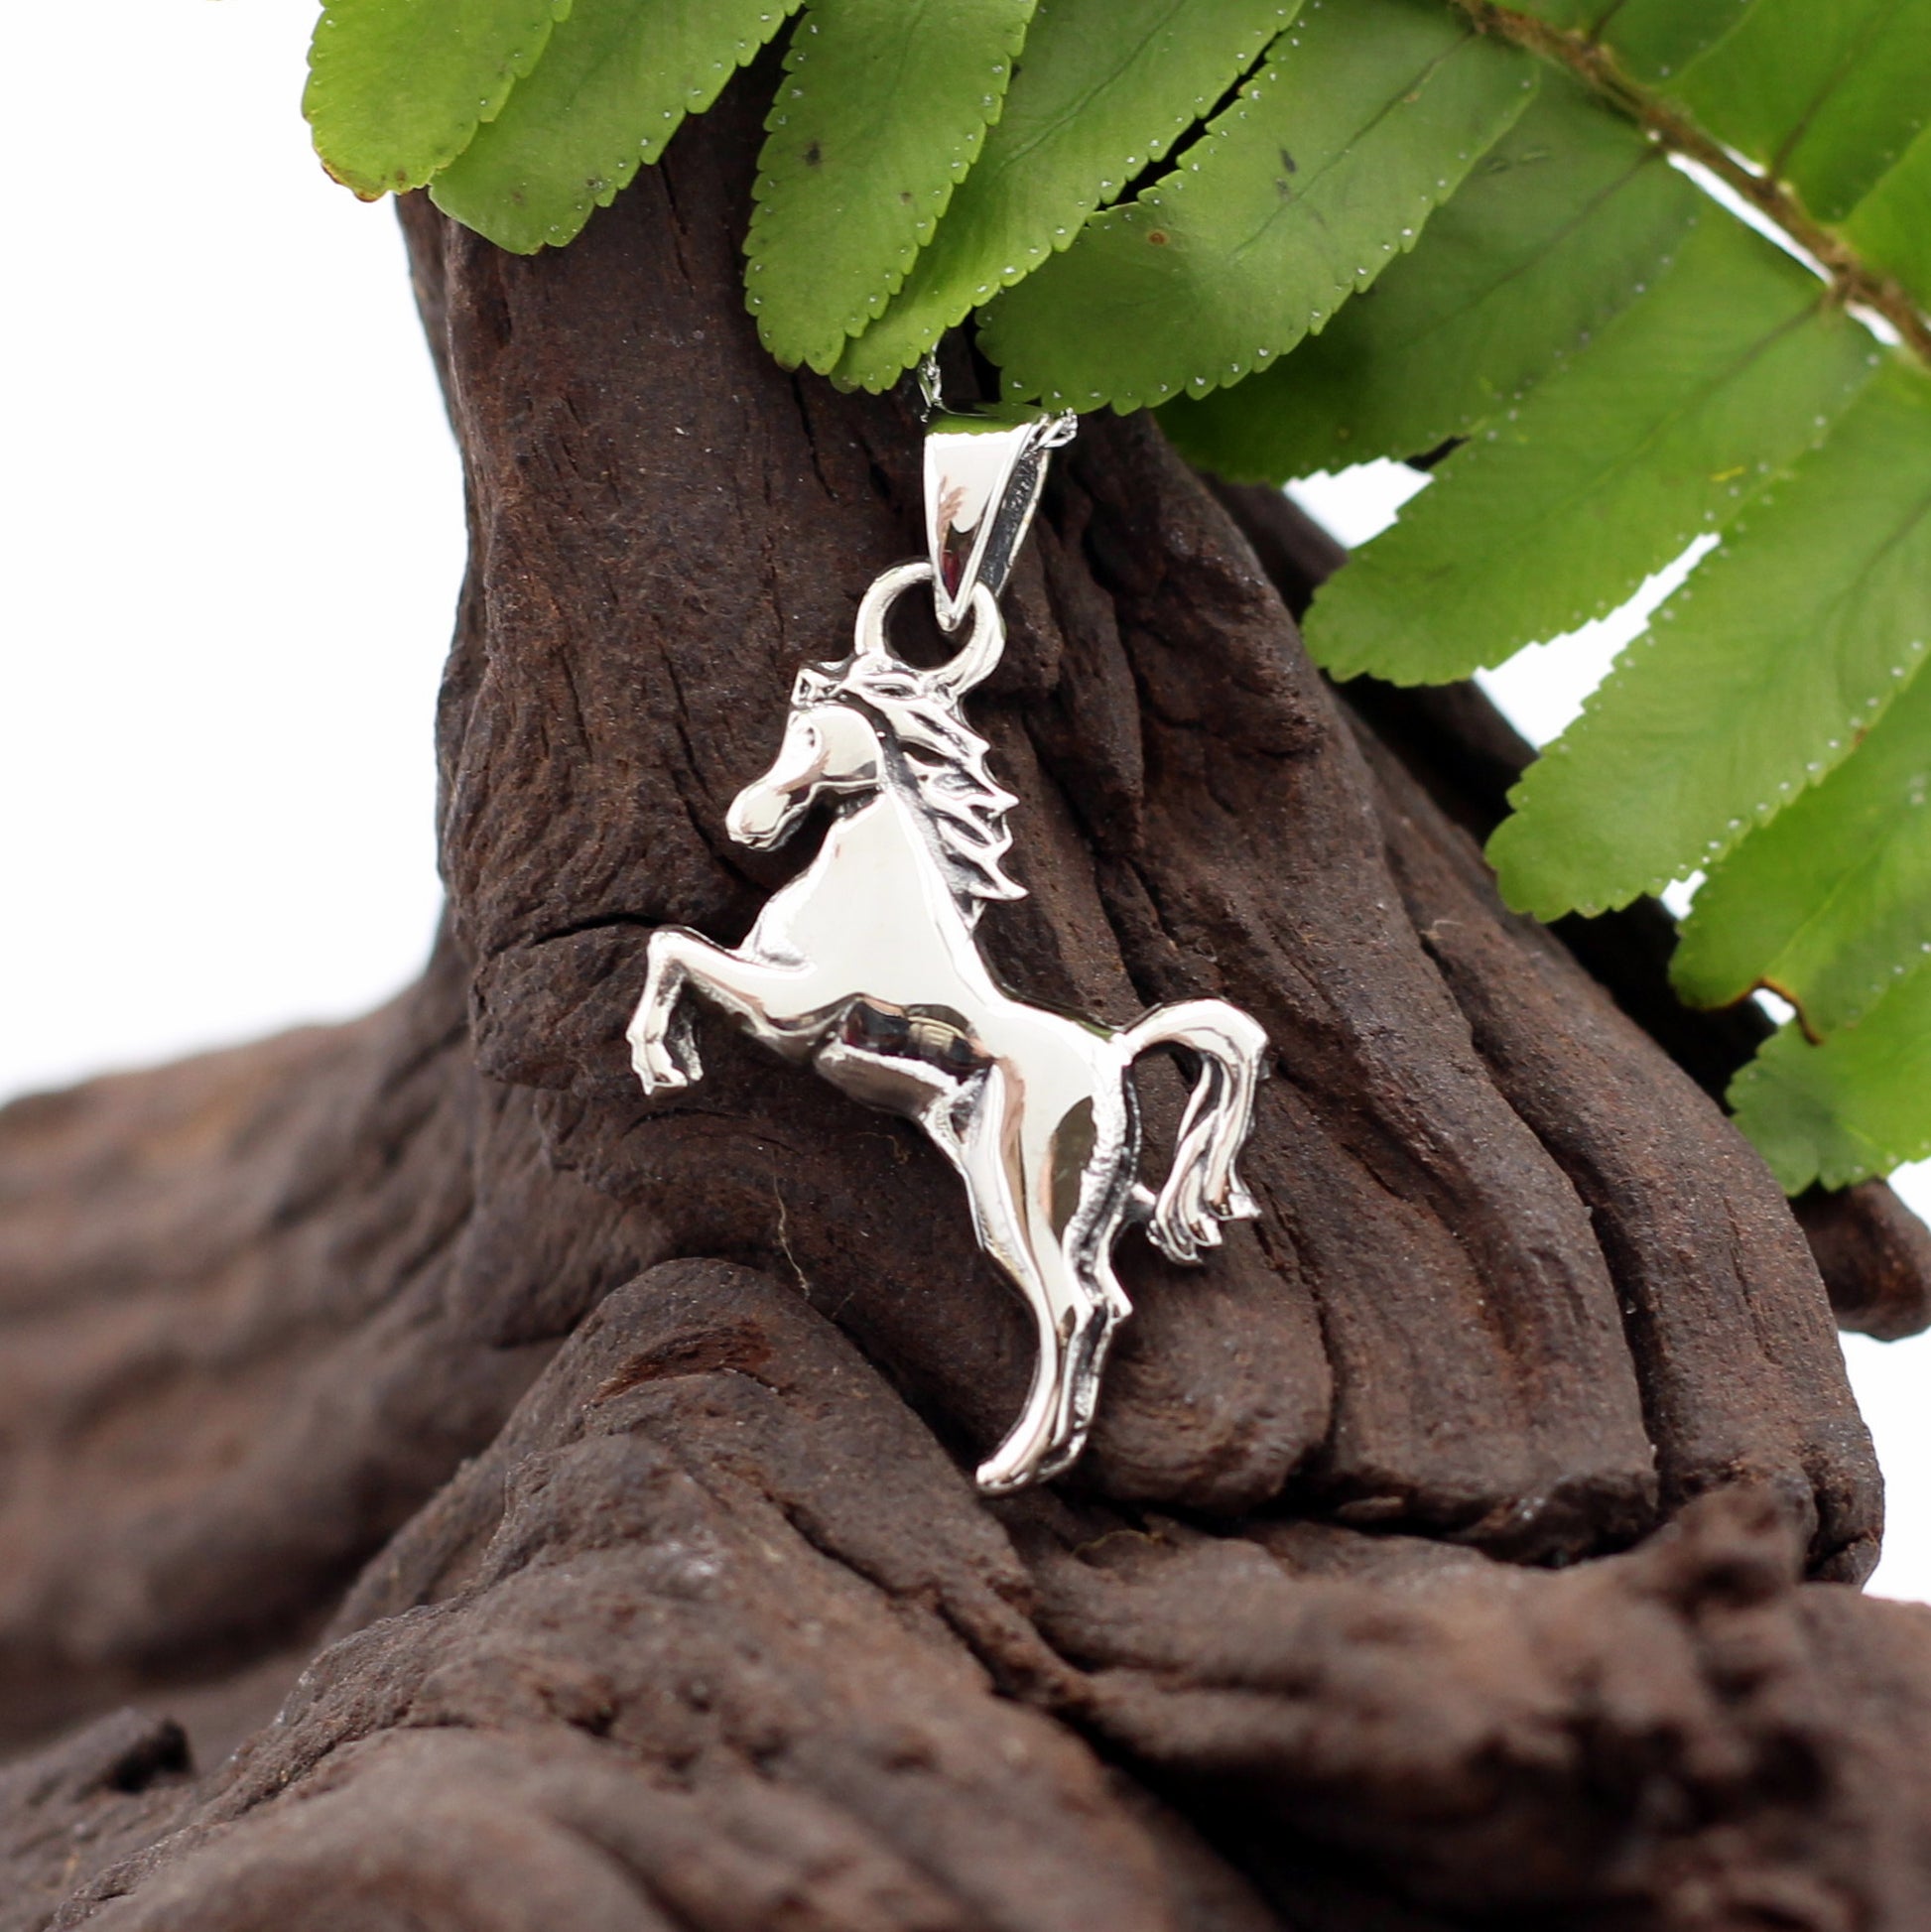 925 Sterling Silver Dancing Horse Pendant - Hashtag Bamboo